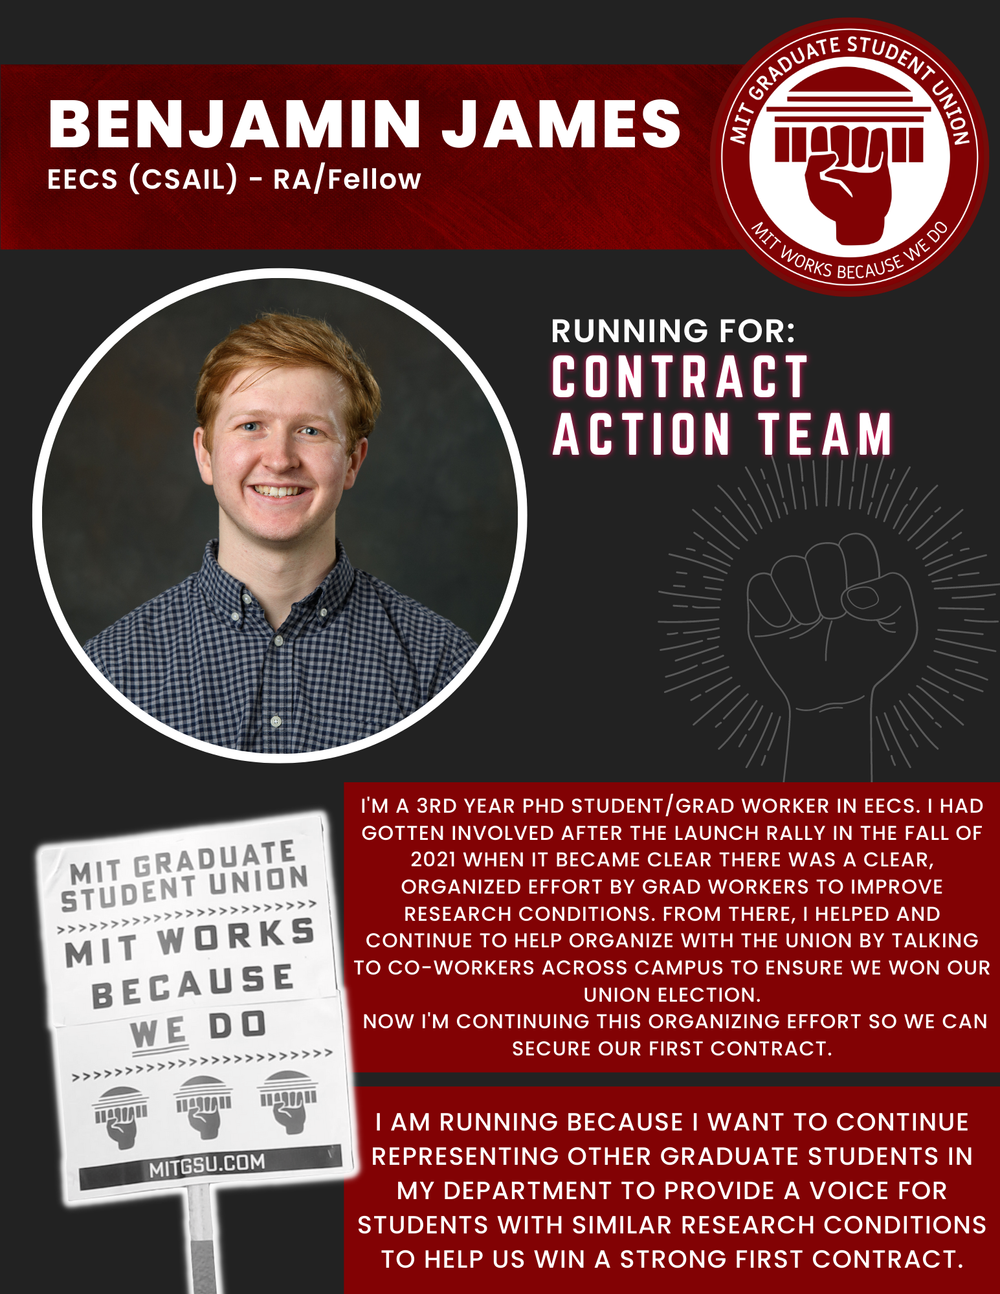  BENJAMIN JAMES EECS (CSAIL) - RA/Fellow   RUNNING FOR: Contract Action Team  I'M A 3RD YEAR PHD STUDENT/GRAD WORKER IN EECS. I HAD GOTTEN INVOLVED AFTER THE LAUNCH RALLY IN THE FALL OF 2021 WHEN IT BECAME CLEAR THERE WAS A CLEAR,  ORGANIZED EFFORT B